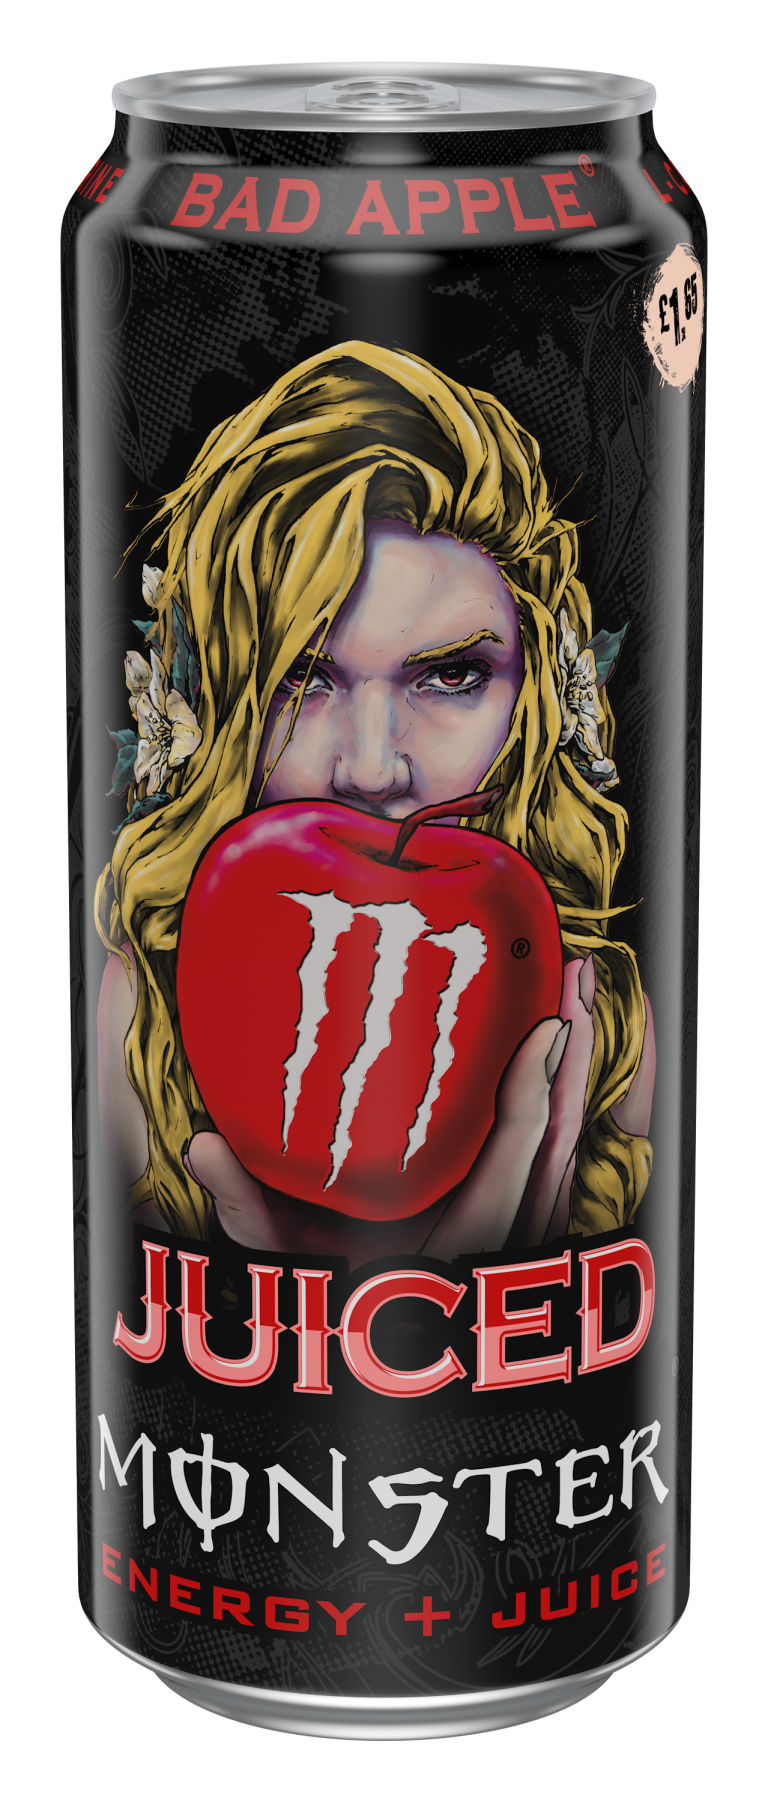 CCEP introduces Monster Juiced Bad Apple